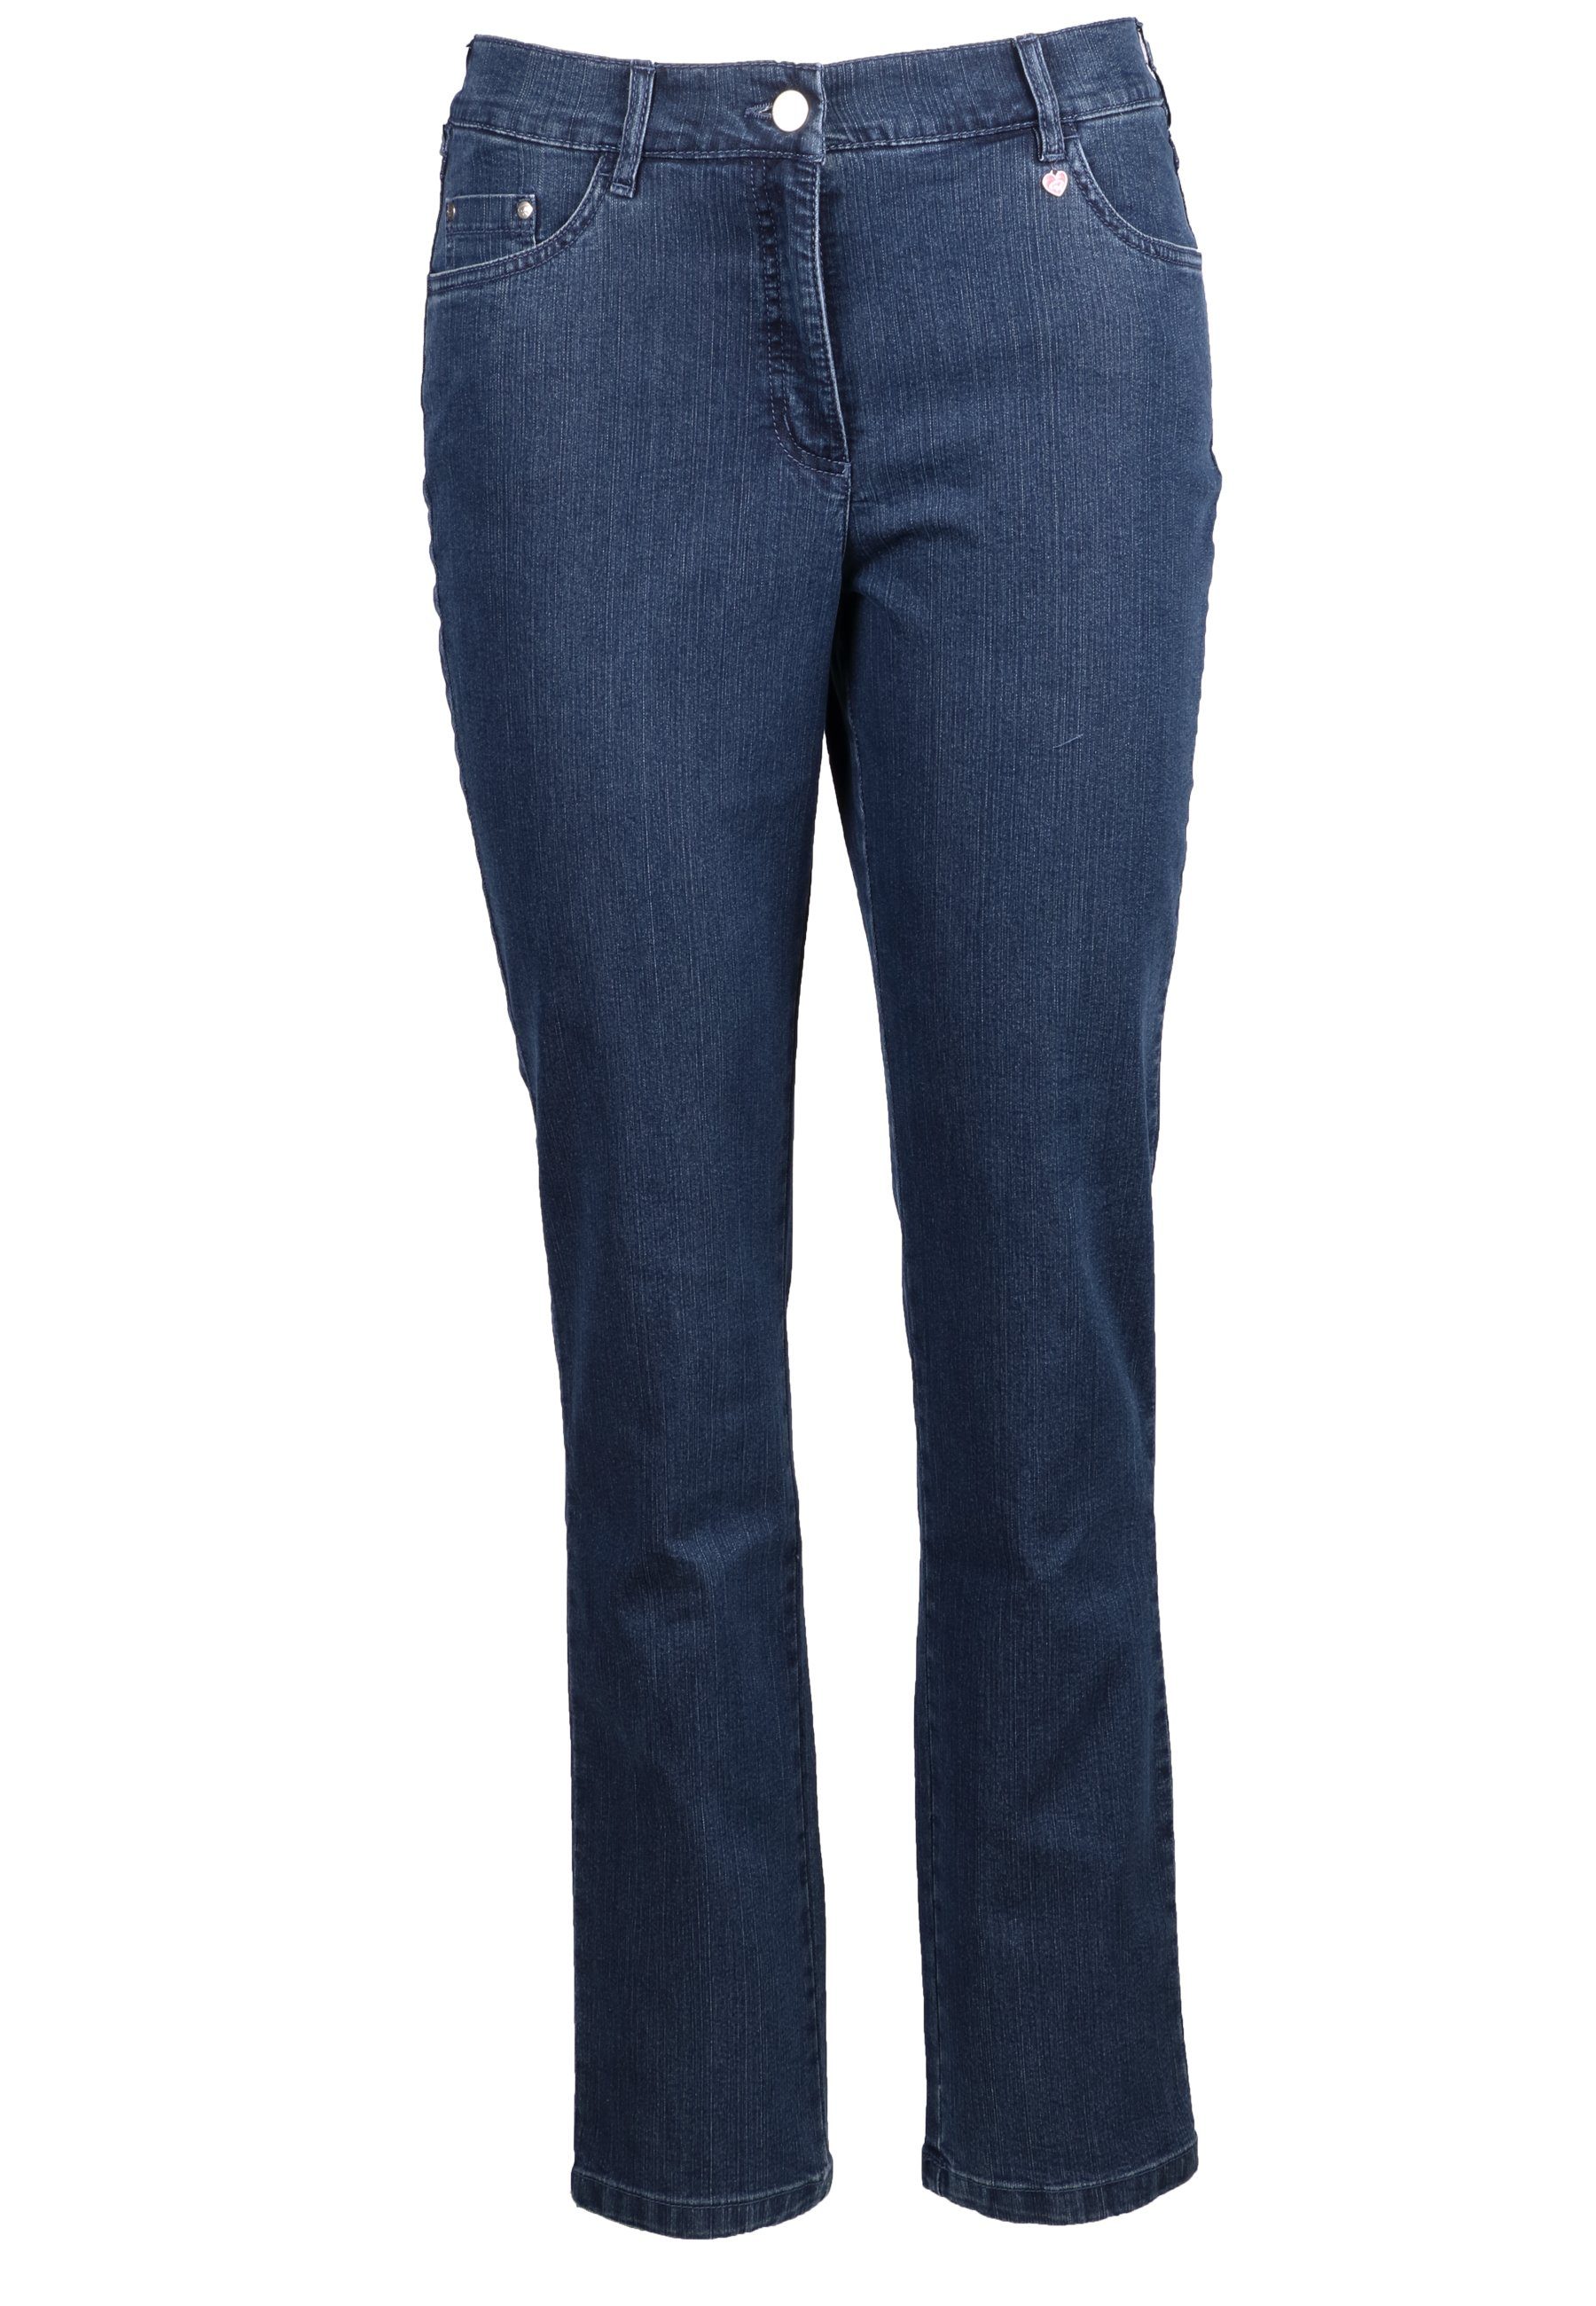 Relaxed by TONI 5-Pocket-Hose Relaxed by Toni Jeans Meine Schoene - blau (1-tlg)